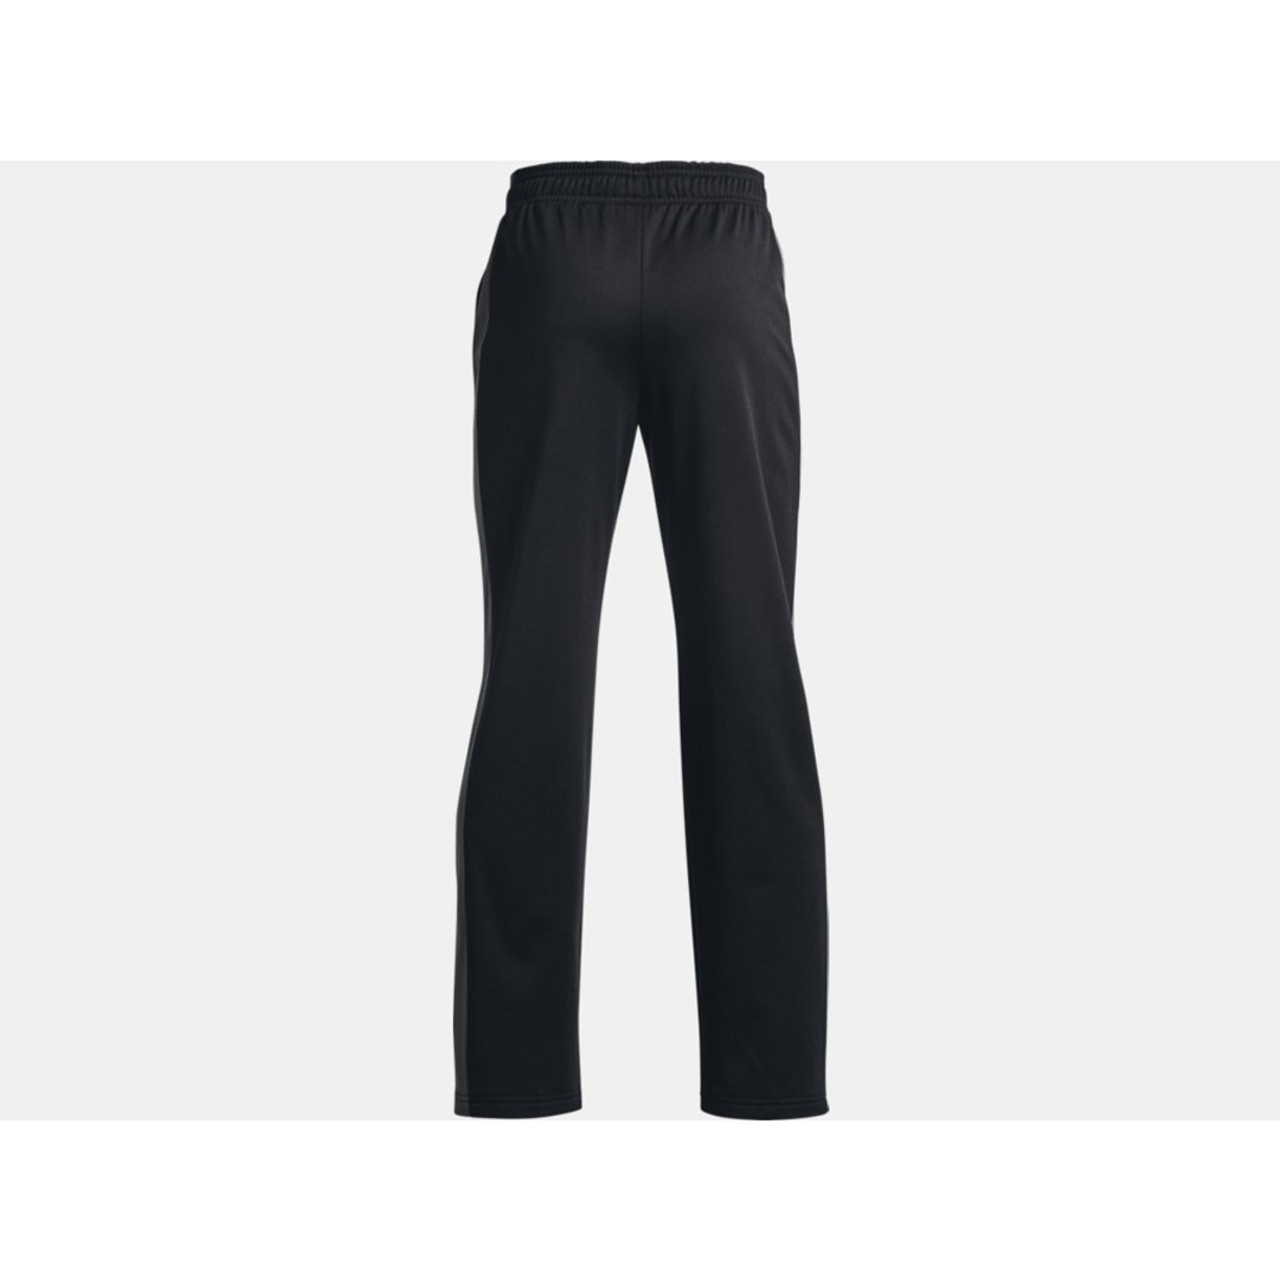 Pants Under Armour UA BRAWLER 2.0 TAPERED PANTS-GRY 